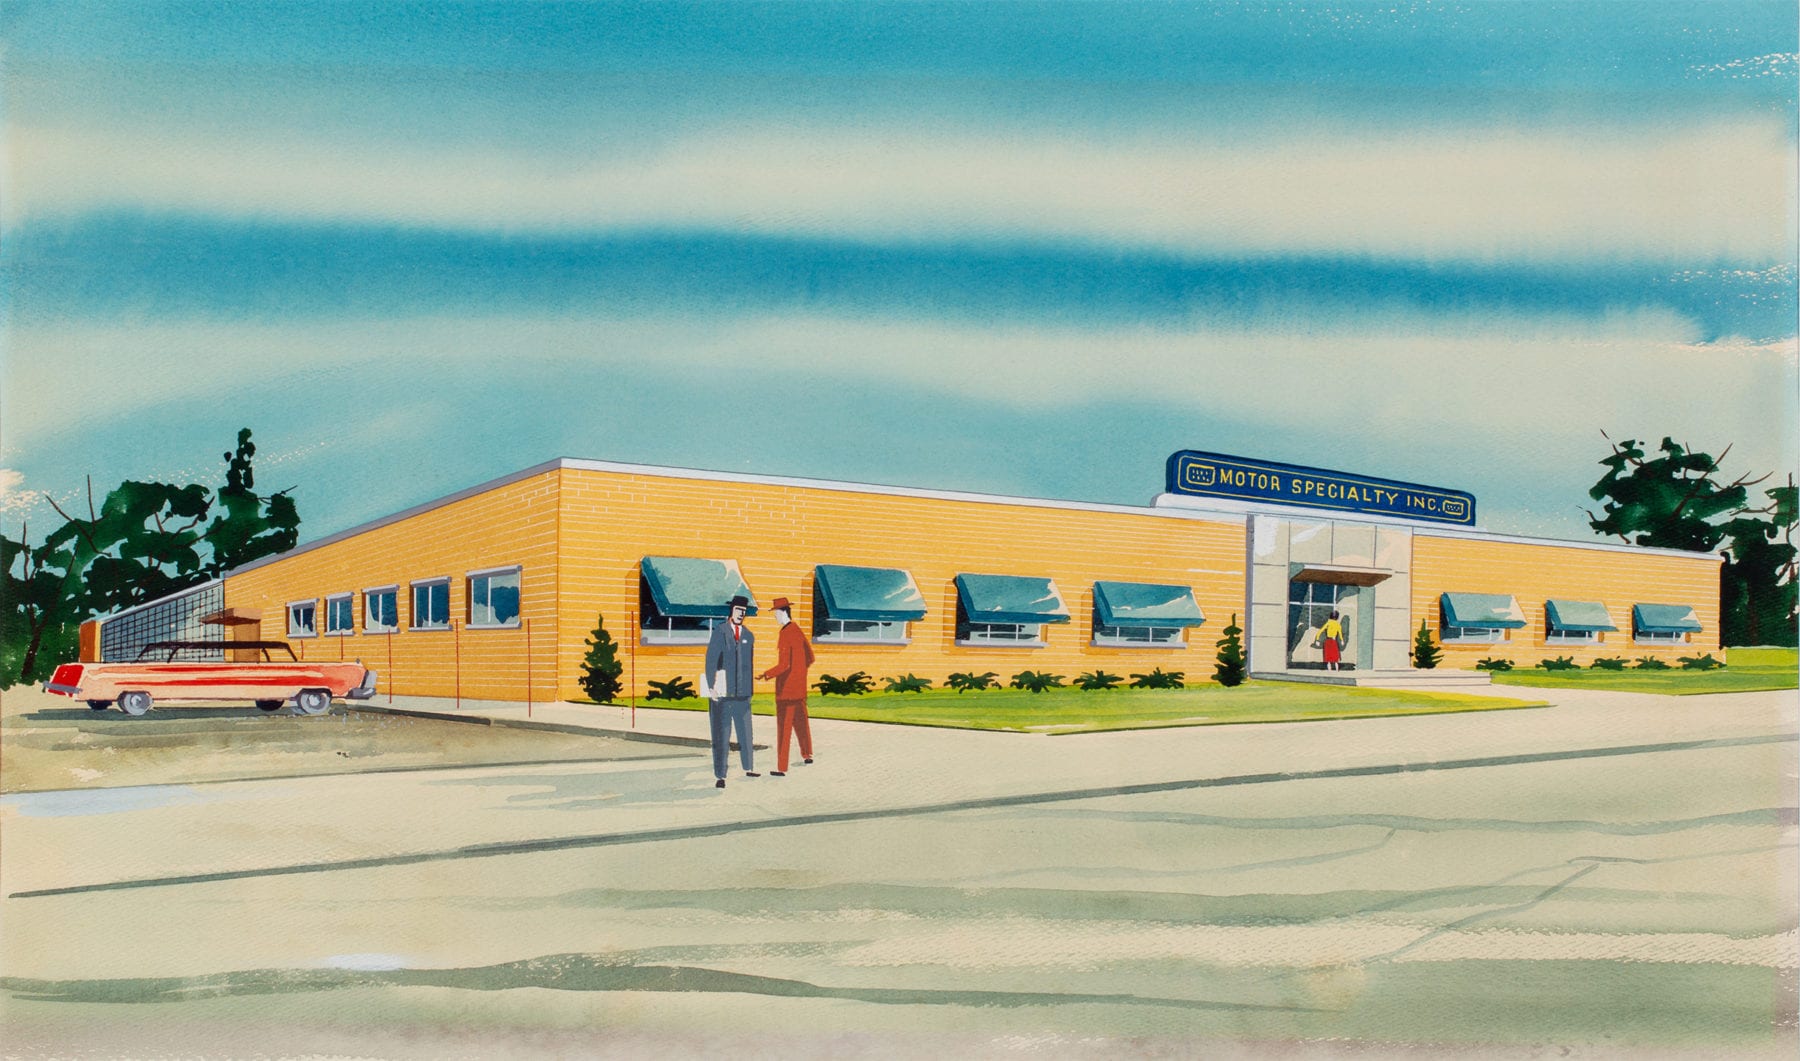 New Motor Specialty Facility in 1961